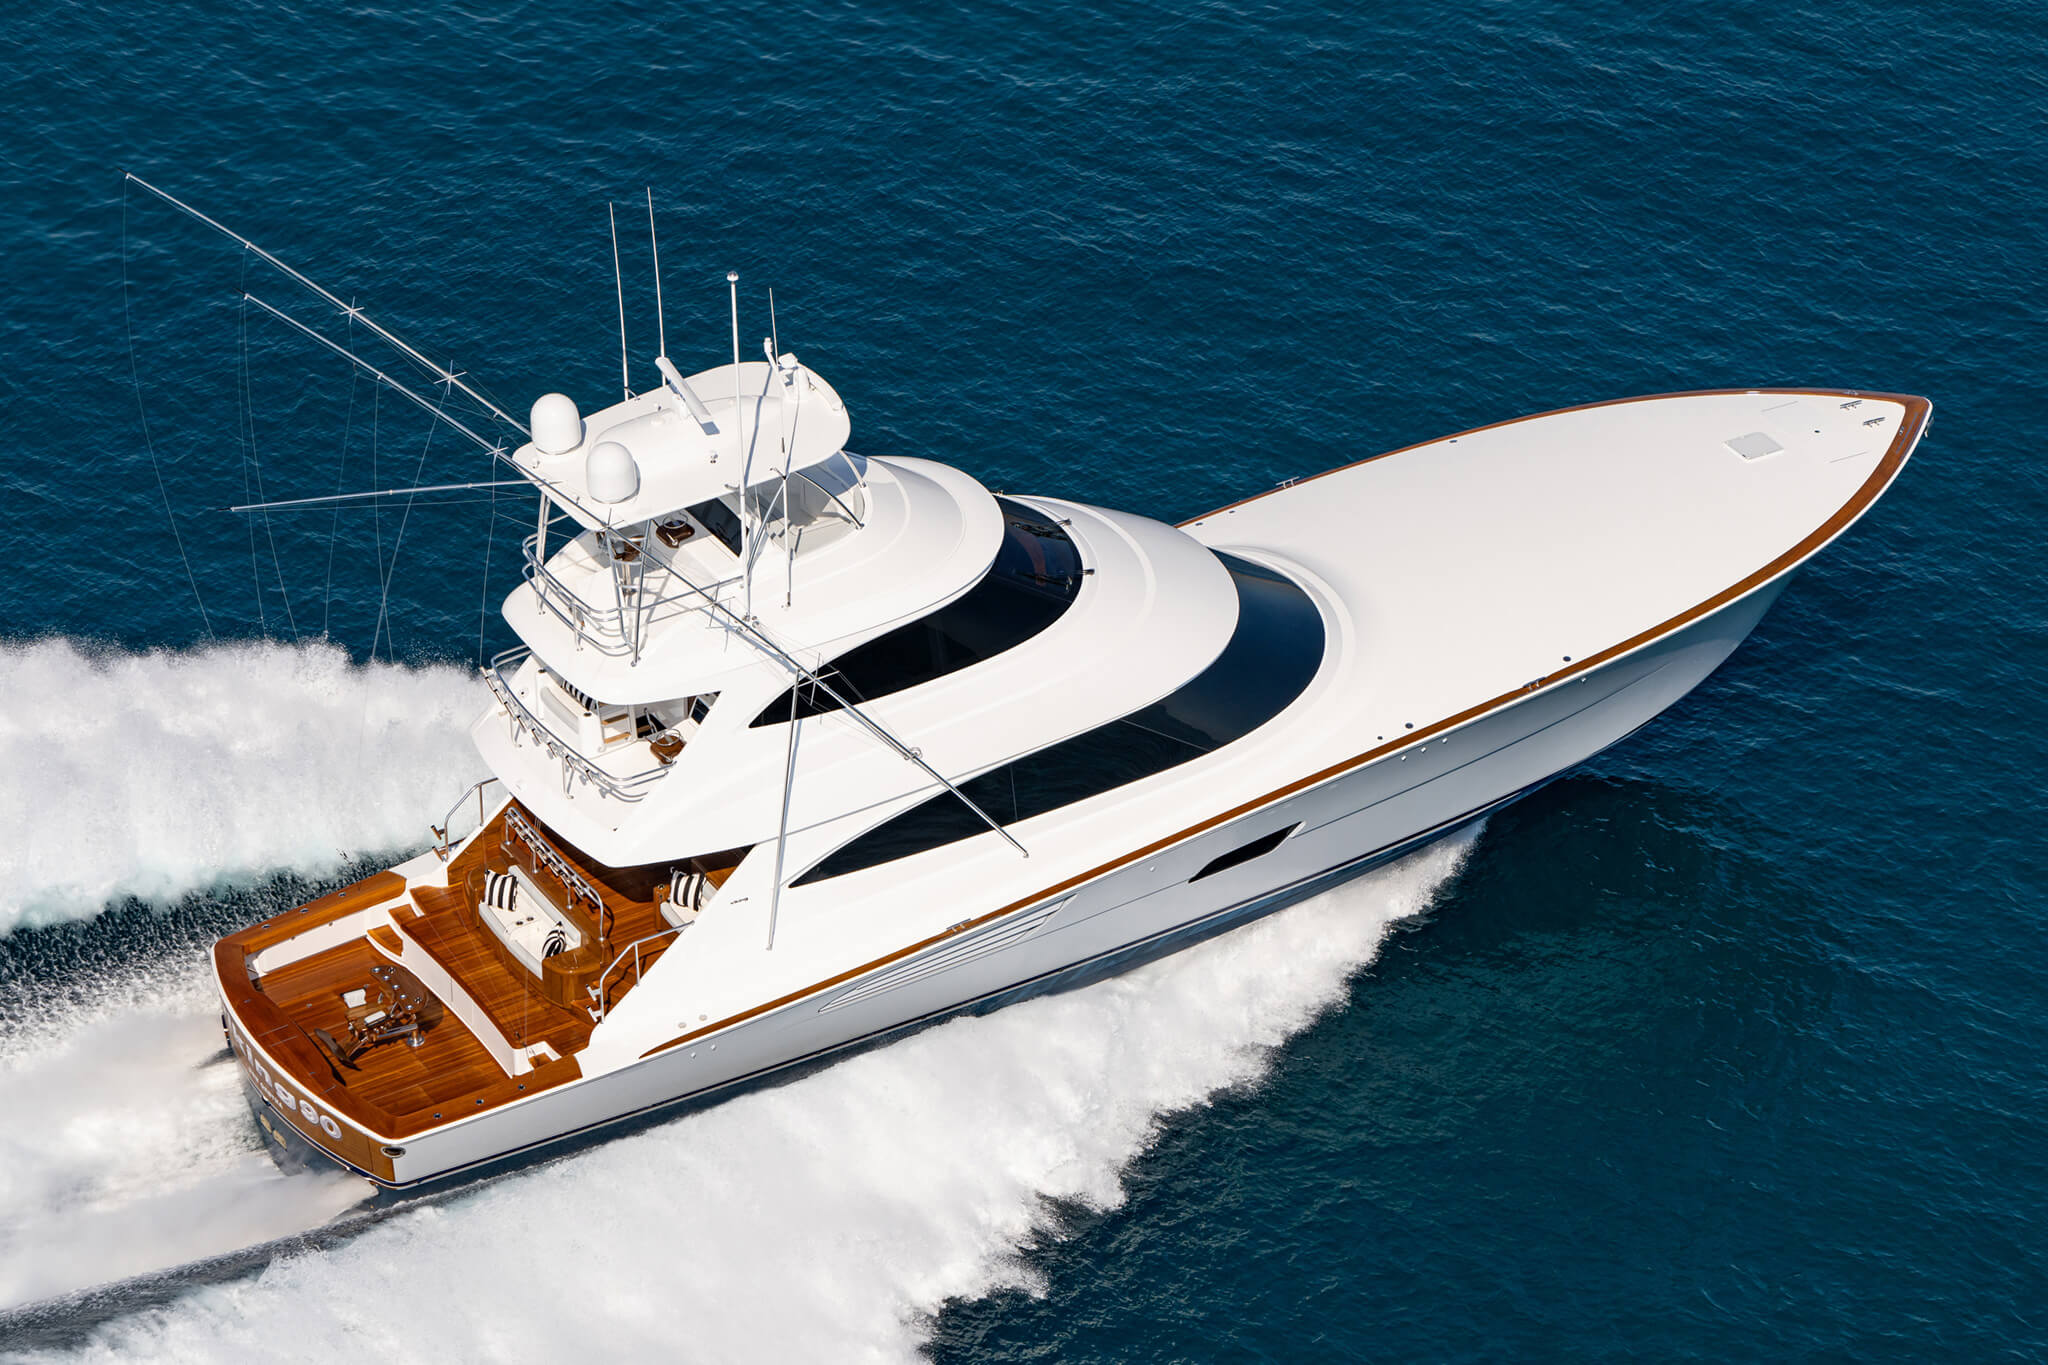 South Jersey Yacht Sales - New & Pre-Owned Yacht Sales & Services